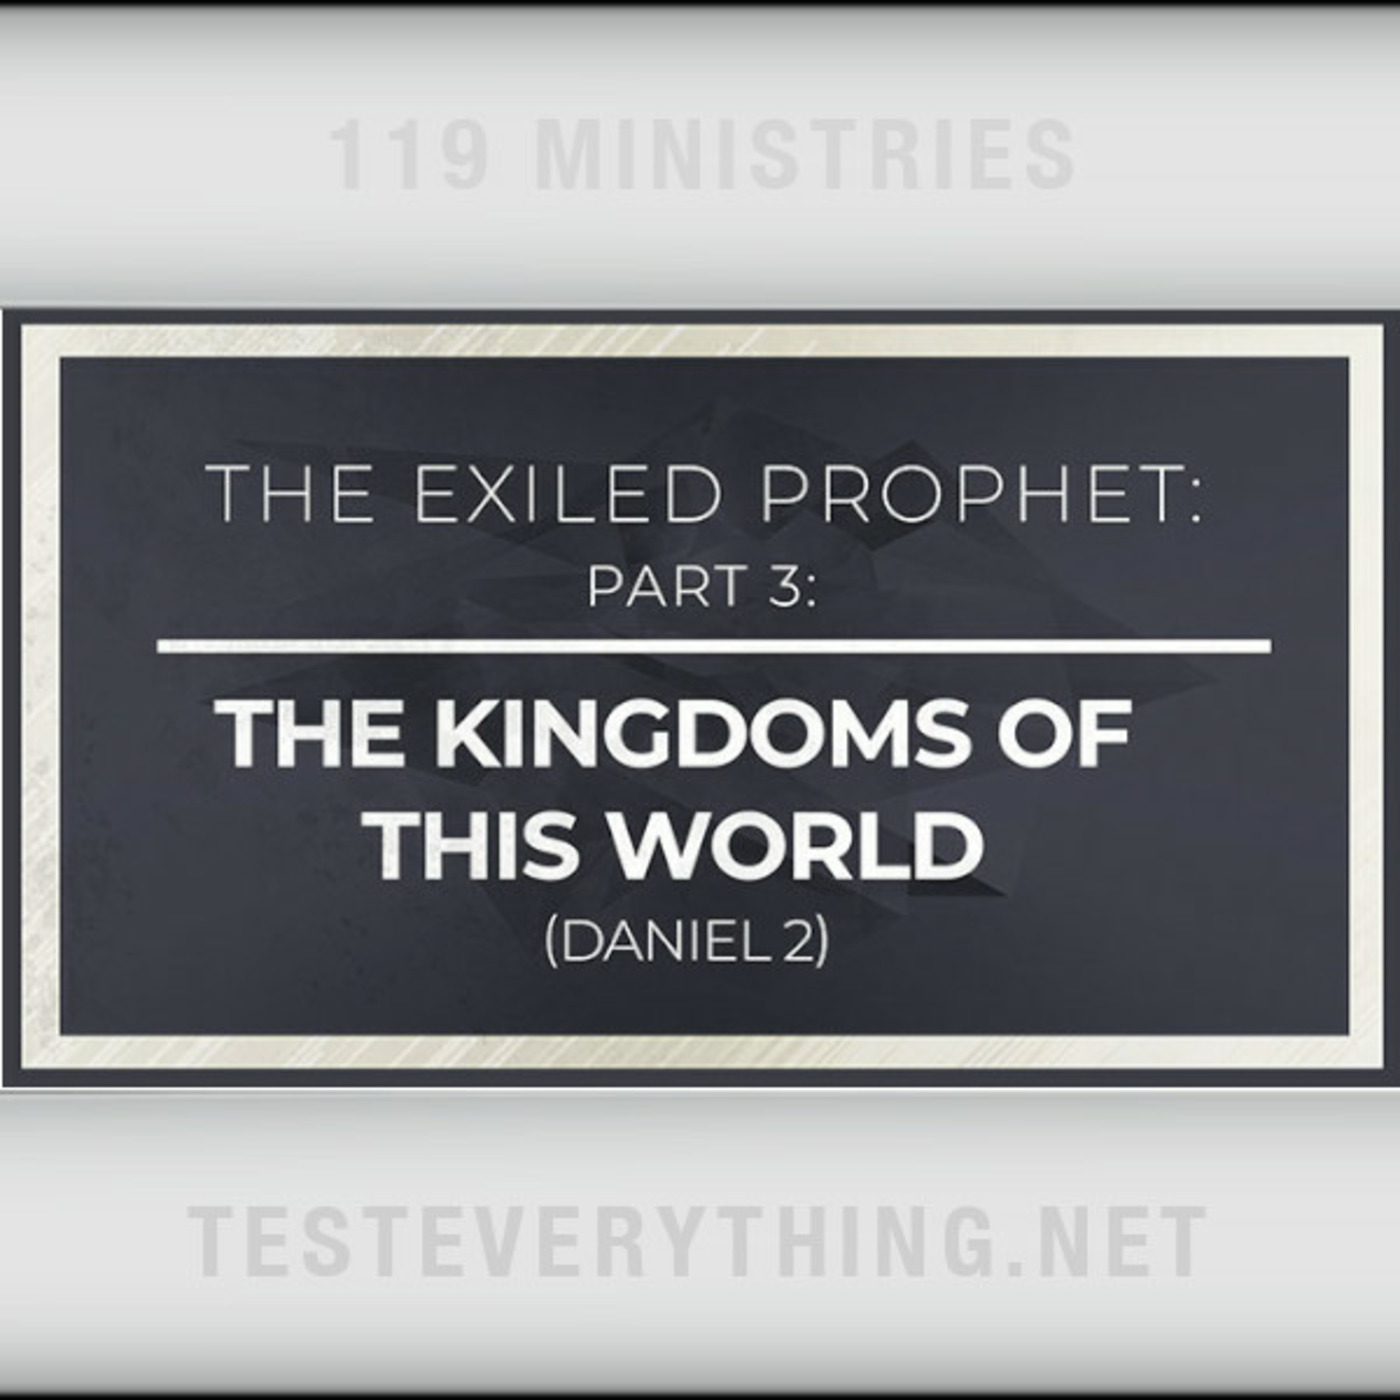 Episode 545: BS: The Exiled Prophet - The Kingdoms of this World (Daniel 2)